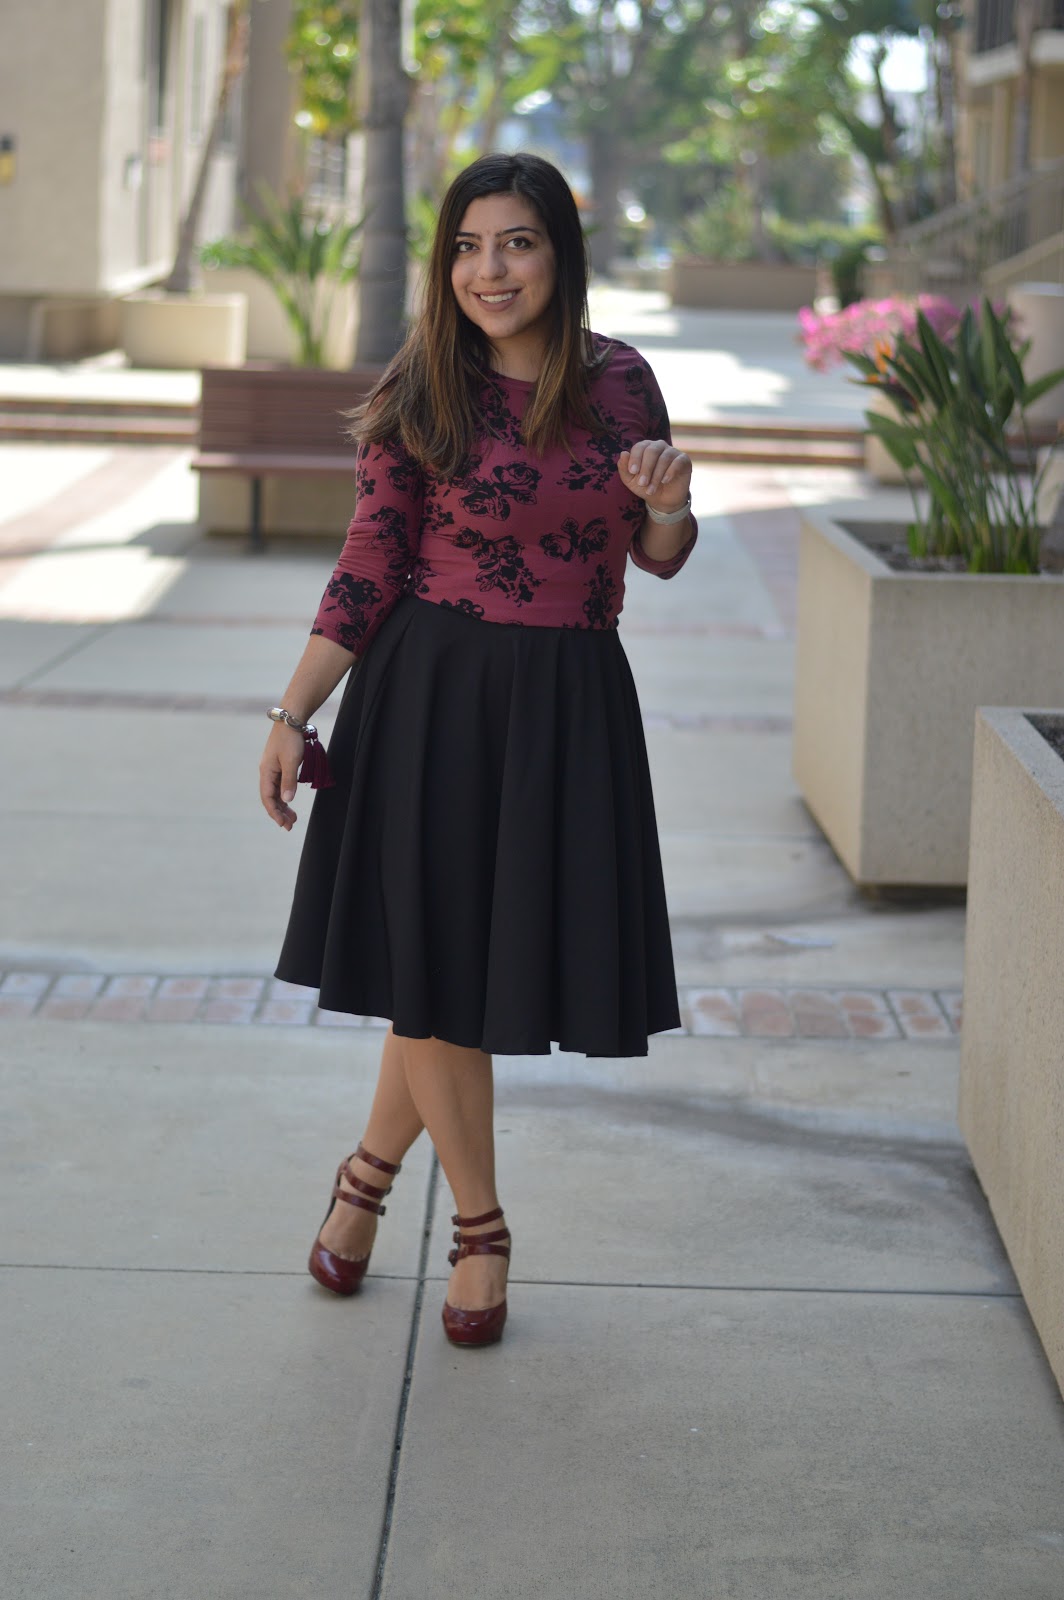 Business Casual - The Interview Dinner Skirt from MakeMeChic - PhD ...